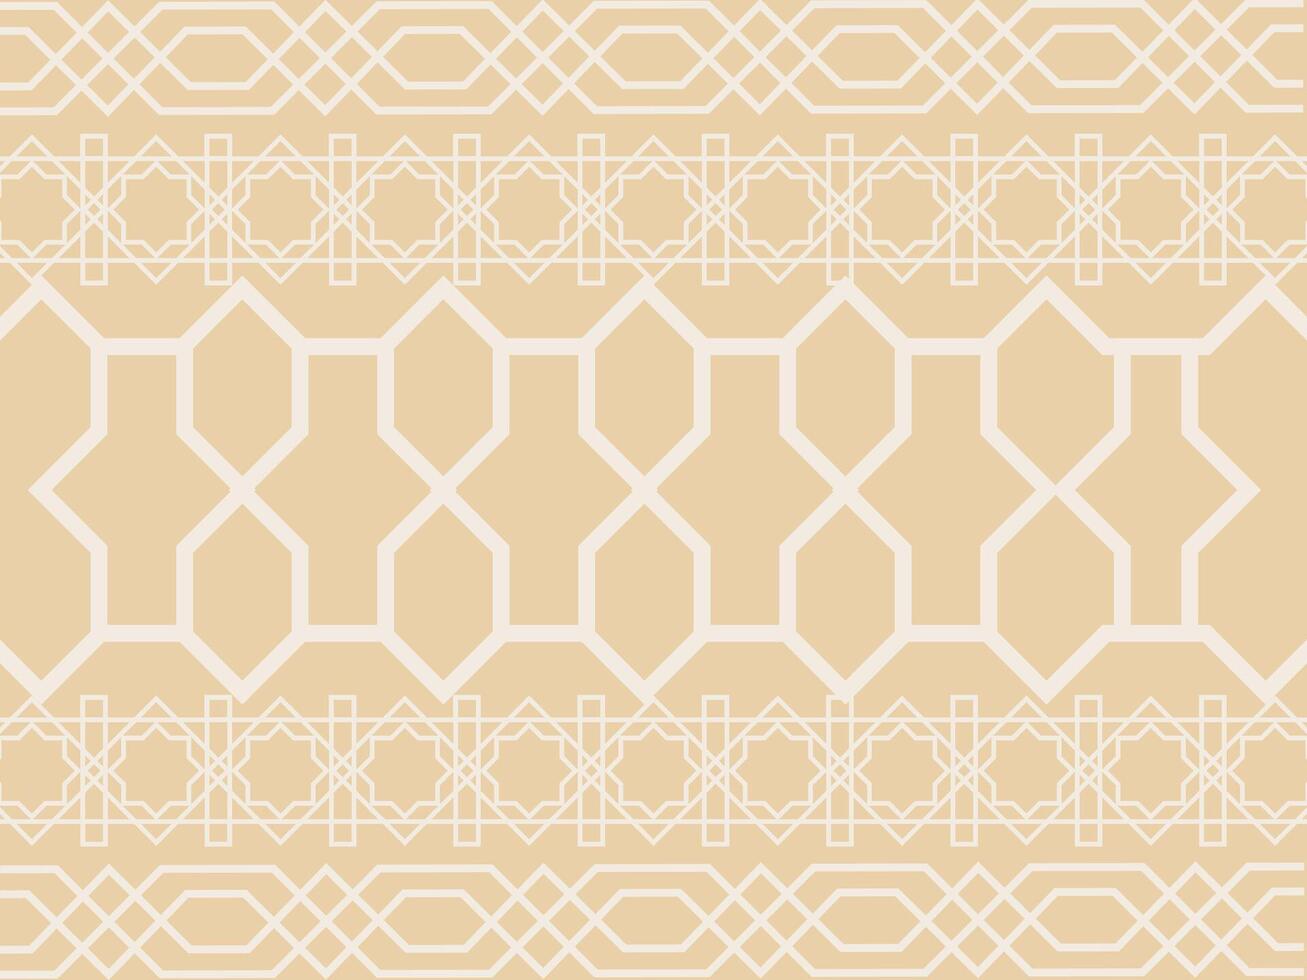 Islamic ornament and pattern background vector